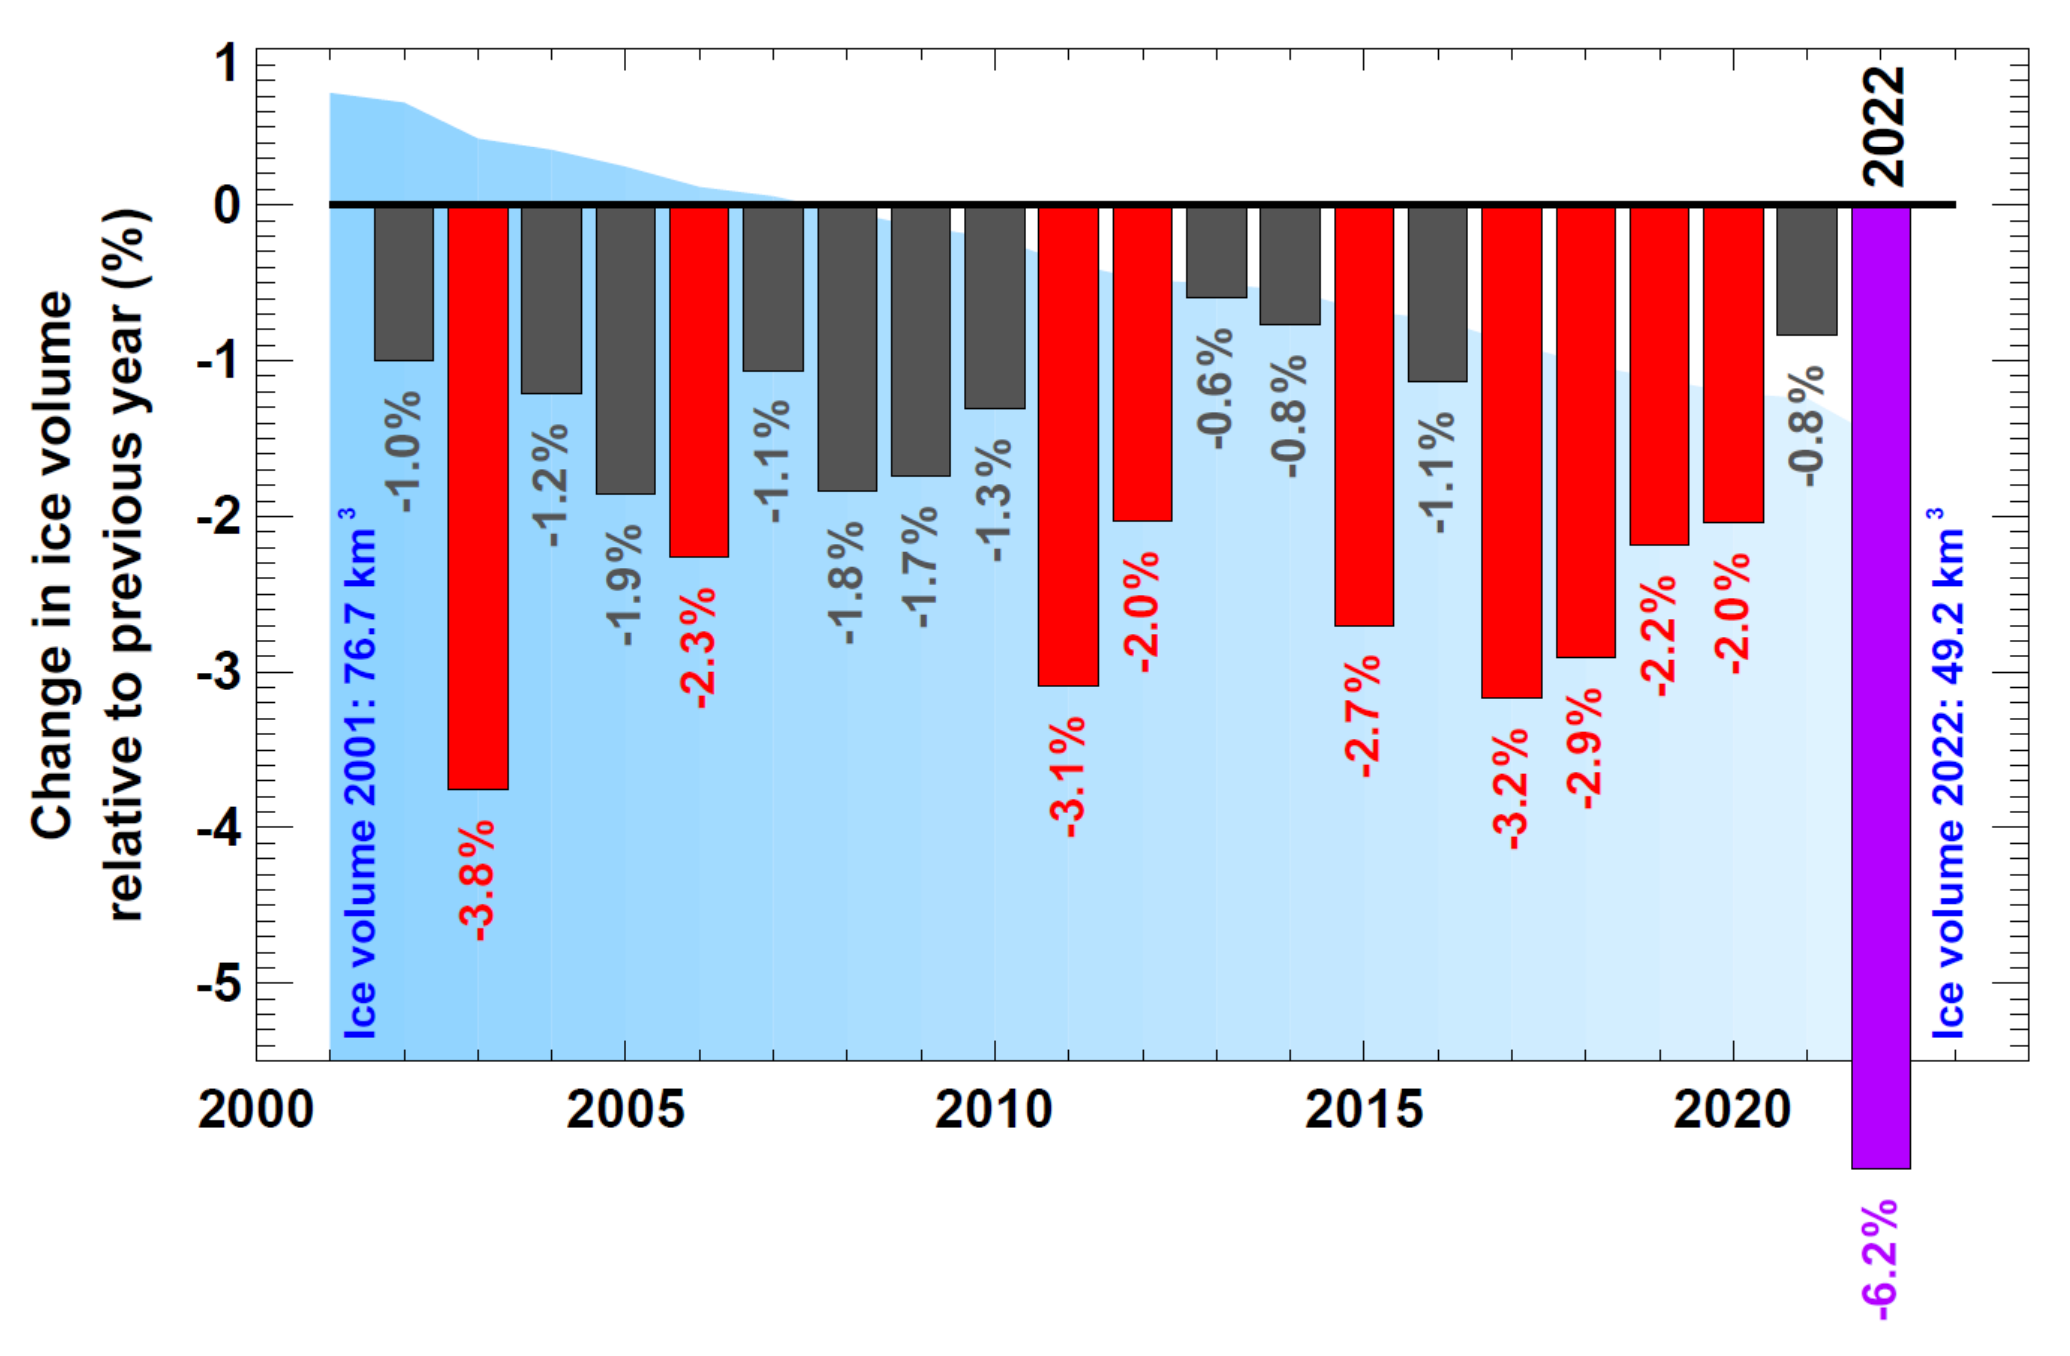 Total annual loss of Swiss glaciers related to the current ice volume, 2002-2022. The vertical bars indicate the percentage change in ice volume relative to the previous year. Red bars are the 10 largest relative mass losses on record. The purple bar is the relative mass loss for 2022. The blue shaded area in the background represents the overall ice volume. In the European Alps, records of glacier mass loss were shattered in 2022. Mass losses were far beyond the range of historical variability. Average thickness changes of between 3 and over 4 metres were measured throughout the Alps, substantially more than in the previous record year 2003. In Switzerland 6 percent of the glacier ice volume was lost between 2021 and 2022. There are three reasons for this extreme glacier melt. First, there was very little winter snow and this meant that the ice was unprotected in early summer. Second, Saharan dust blew over the Alps darkening the snow surface, thus further accelerating melt. Third, long and persistent heat waves between May and early September 2022 led to massive ice loss. For the first time in history, no snow outlasted the summer season even at the very highest measurement sites and thus no accumulation of fresh ice occurred. Between 2001 and 2022 the volume of glacier ice in Switzerland decreased from 77 km3 to 49 km3, a decline of more than a third. Graphic: WMO